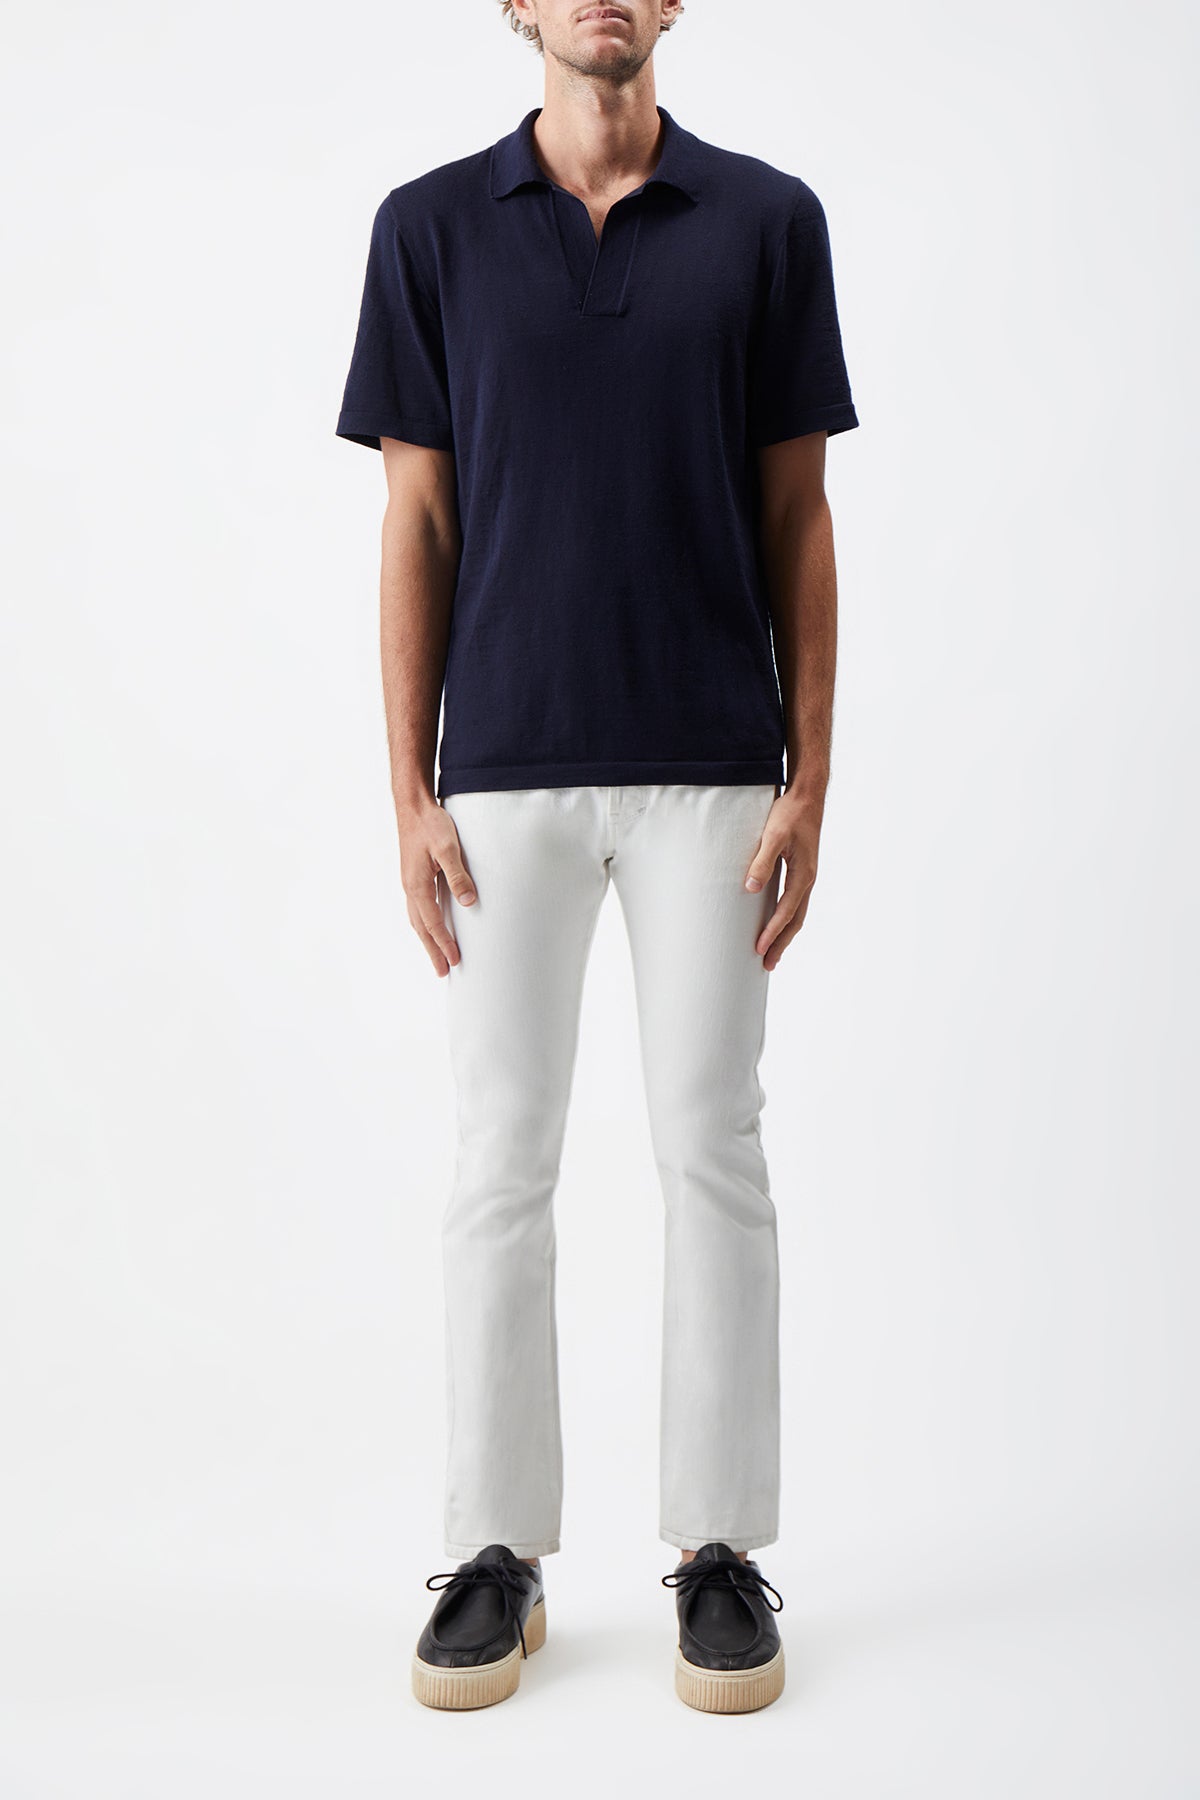 Stendhal Knit Short Sleeve Polo in Navy Cashmere